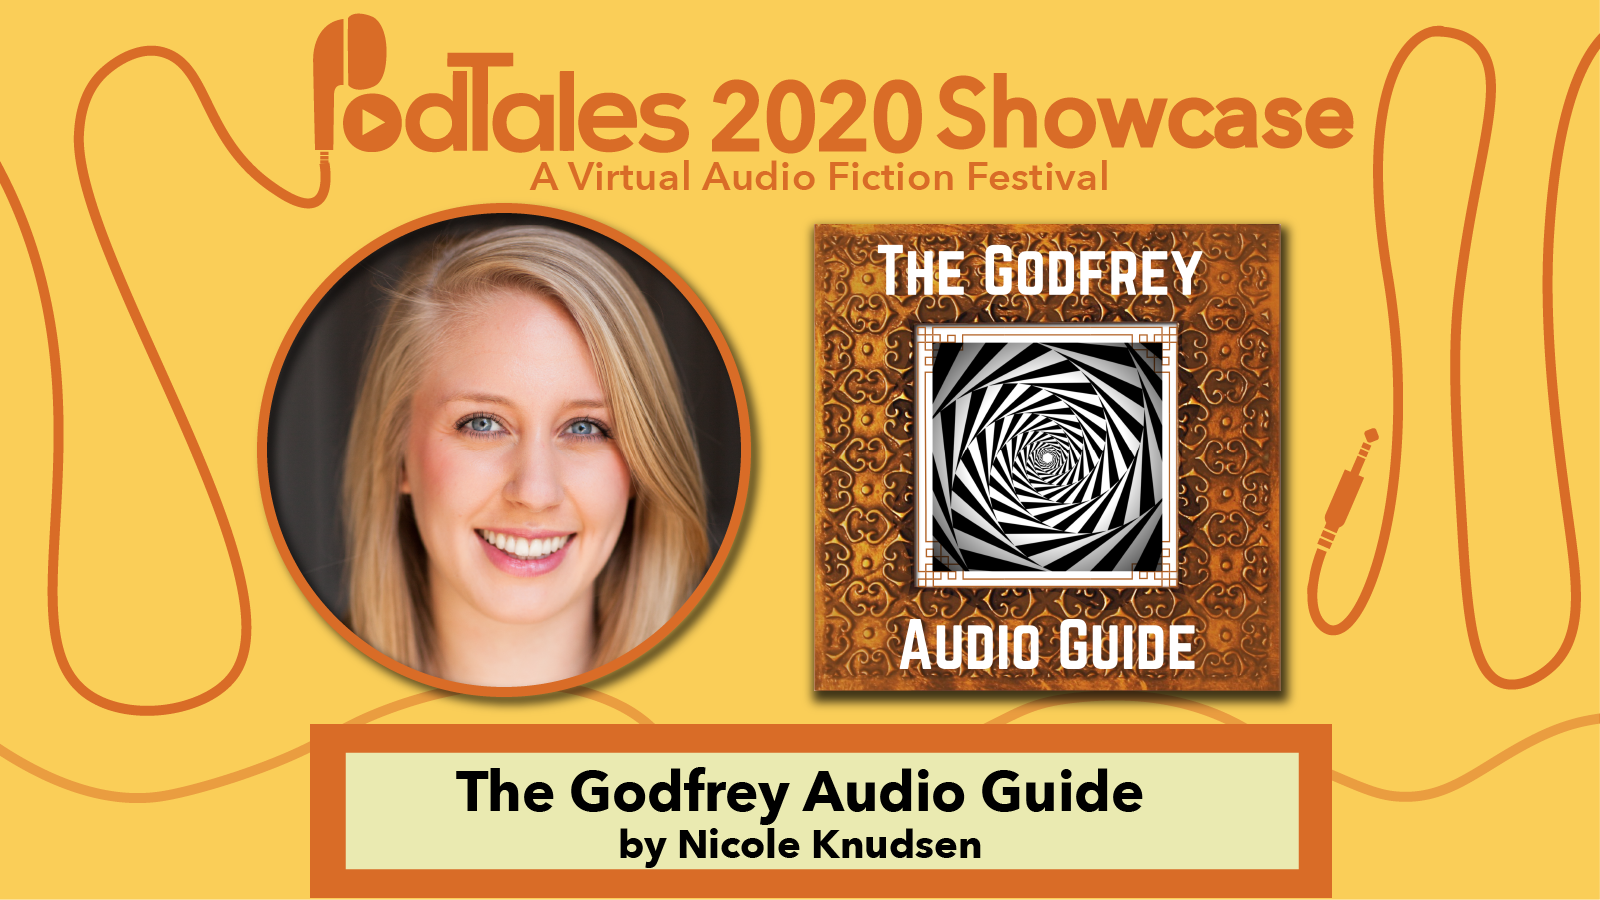 Text reading “PodTales 2020 Showcase: A Virtual Audio Fiction Festival”, Photo of Nicole Knudsen, Show Art for The Godfrey Audio Guide, Text reading “The Godfrey Audio Guide by Nicole Knudsen”